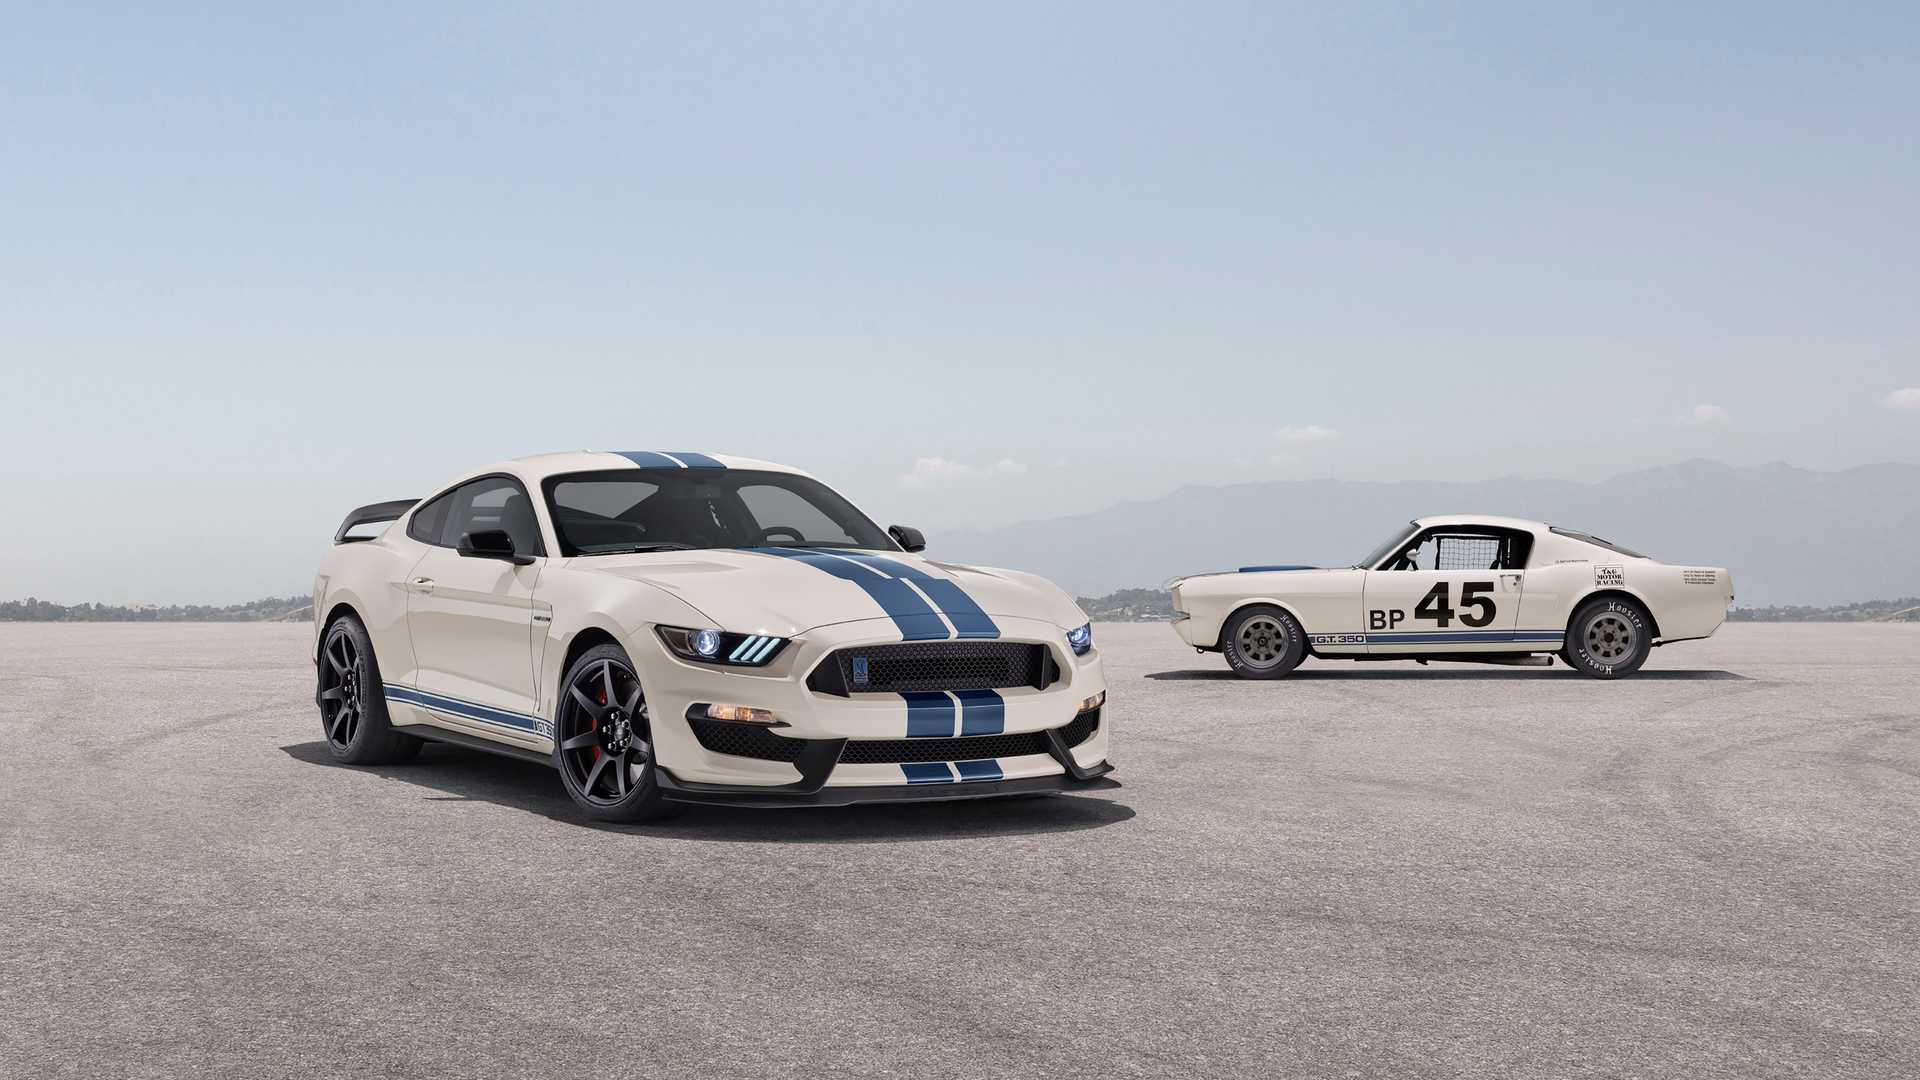 Shelby Gt350 Gt350r Heritage Edition Motor1 Photos